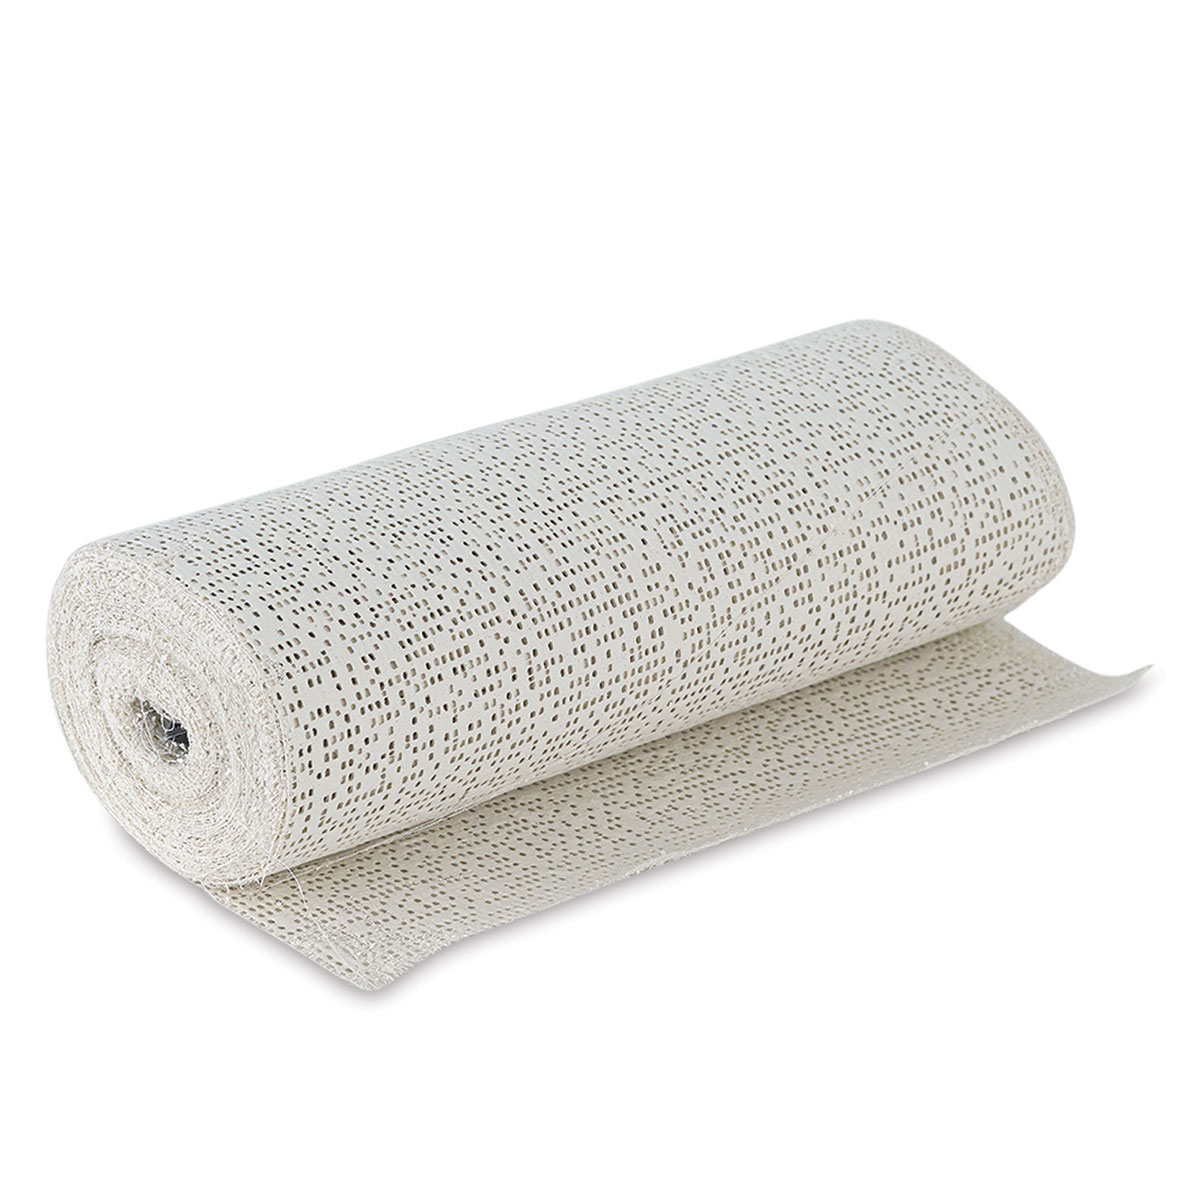 Blick Plaster Cloth- 8- 47 lb Roll, Approximately 250 yds